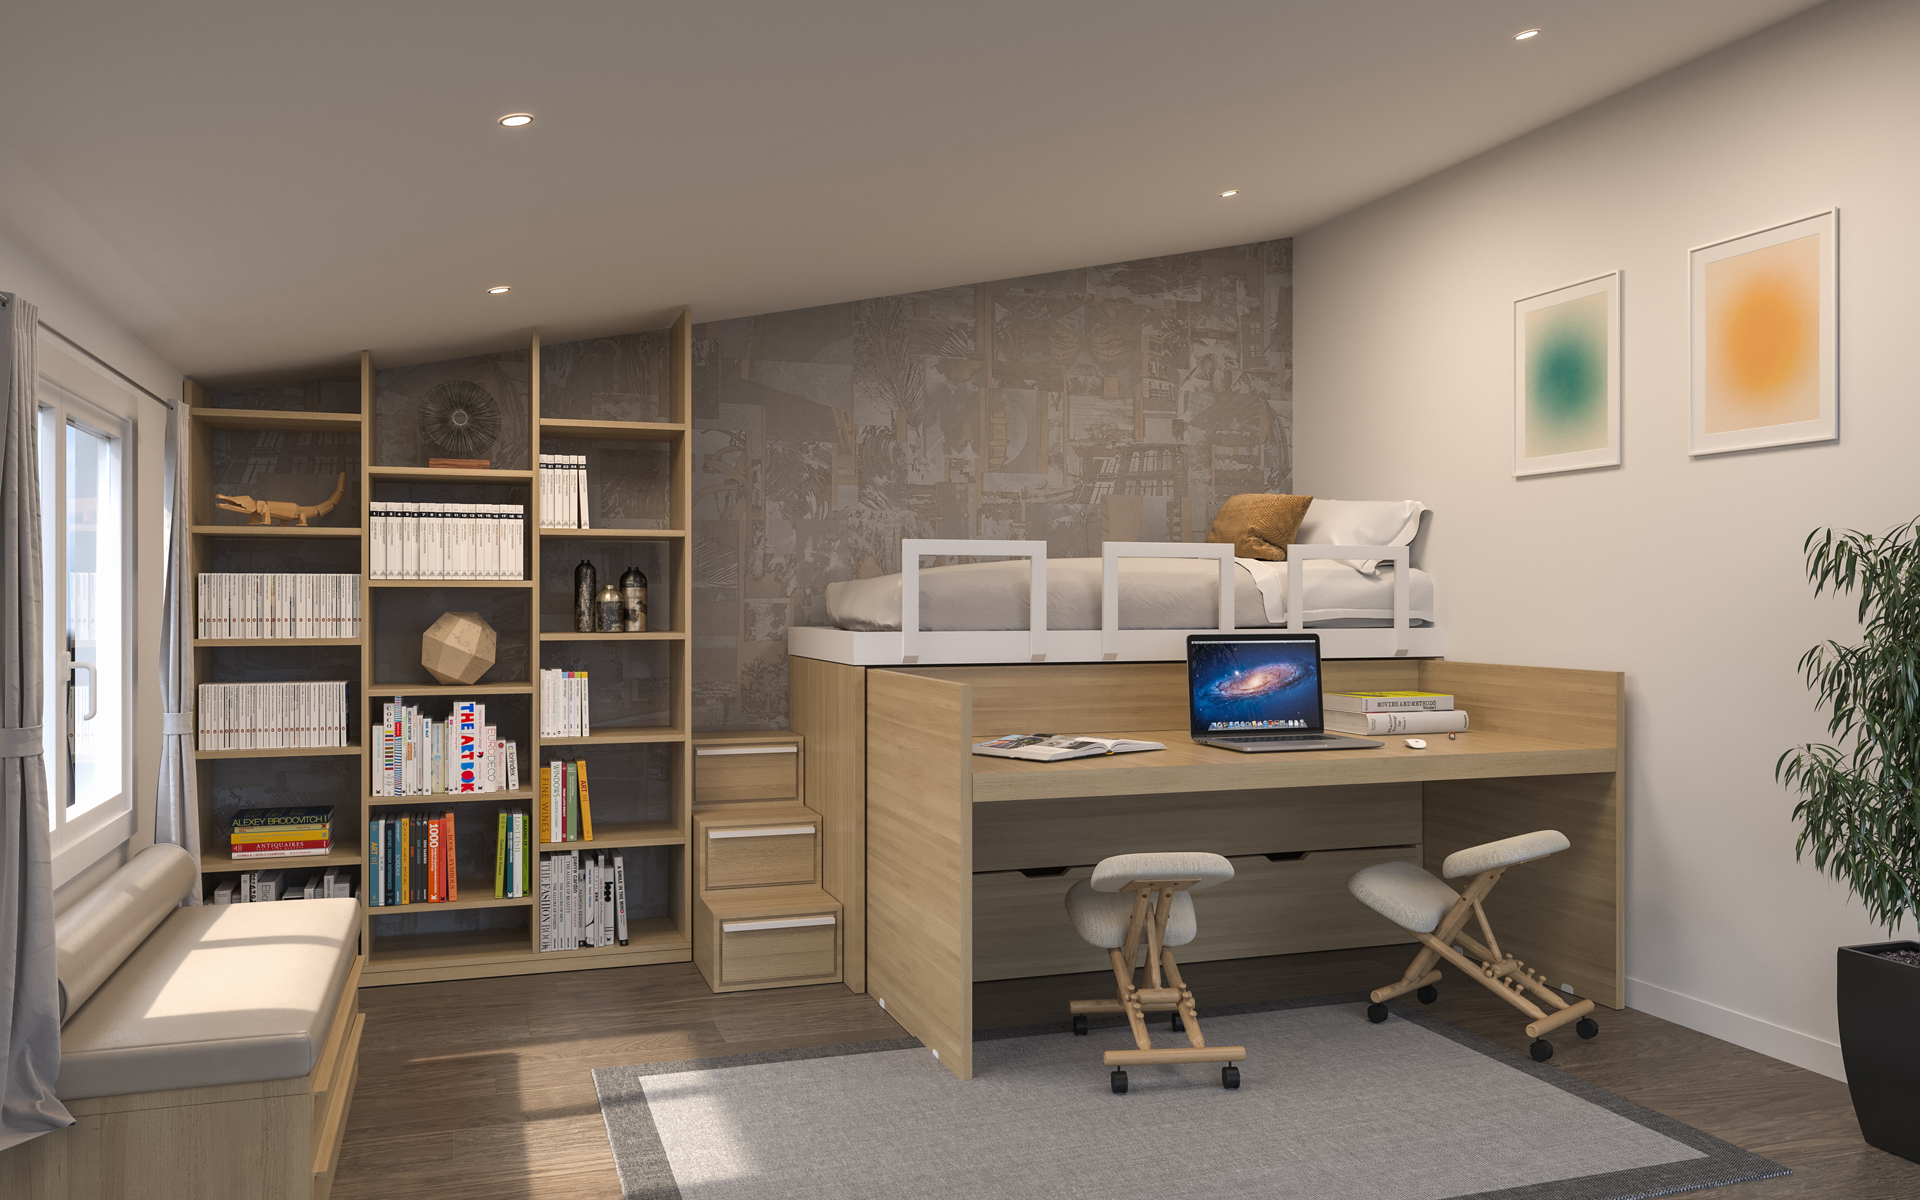 Pull-out SpazioBed: two beds, desk and storage drawers